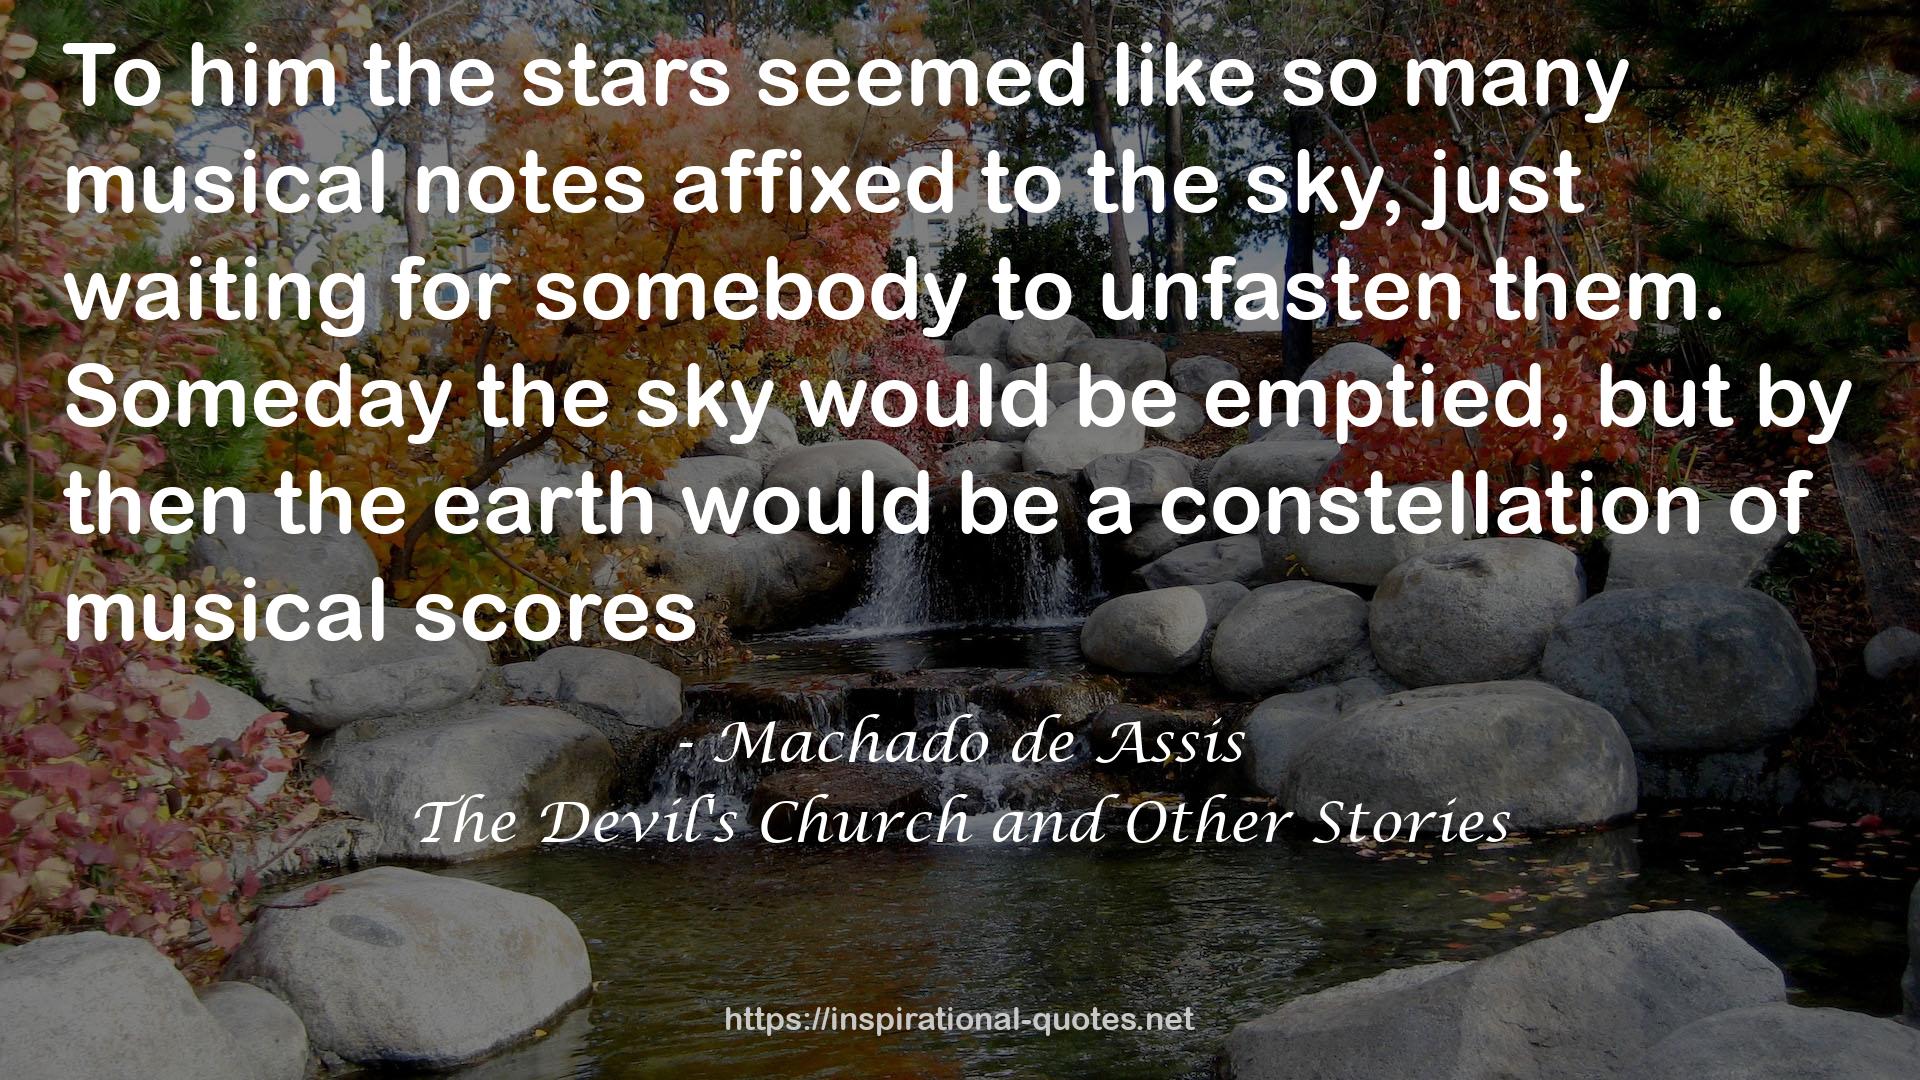 The Devil's Church and Other Stories QUOTES